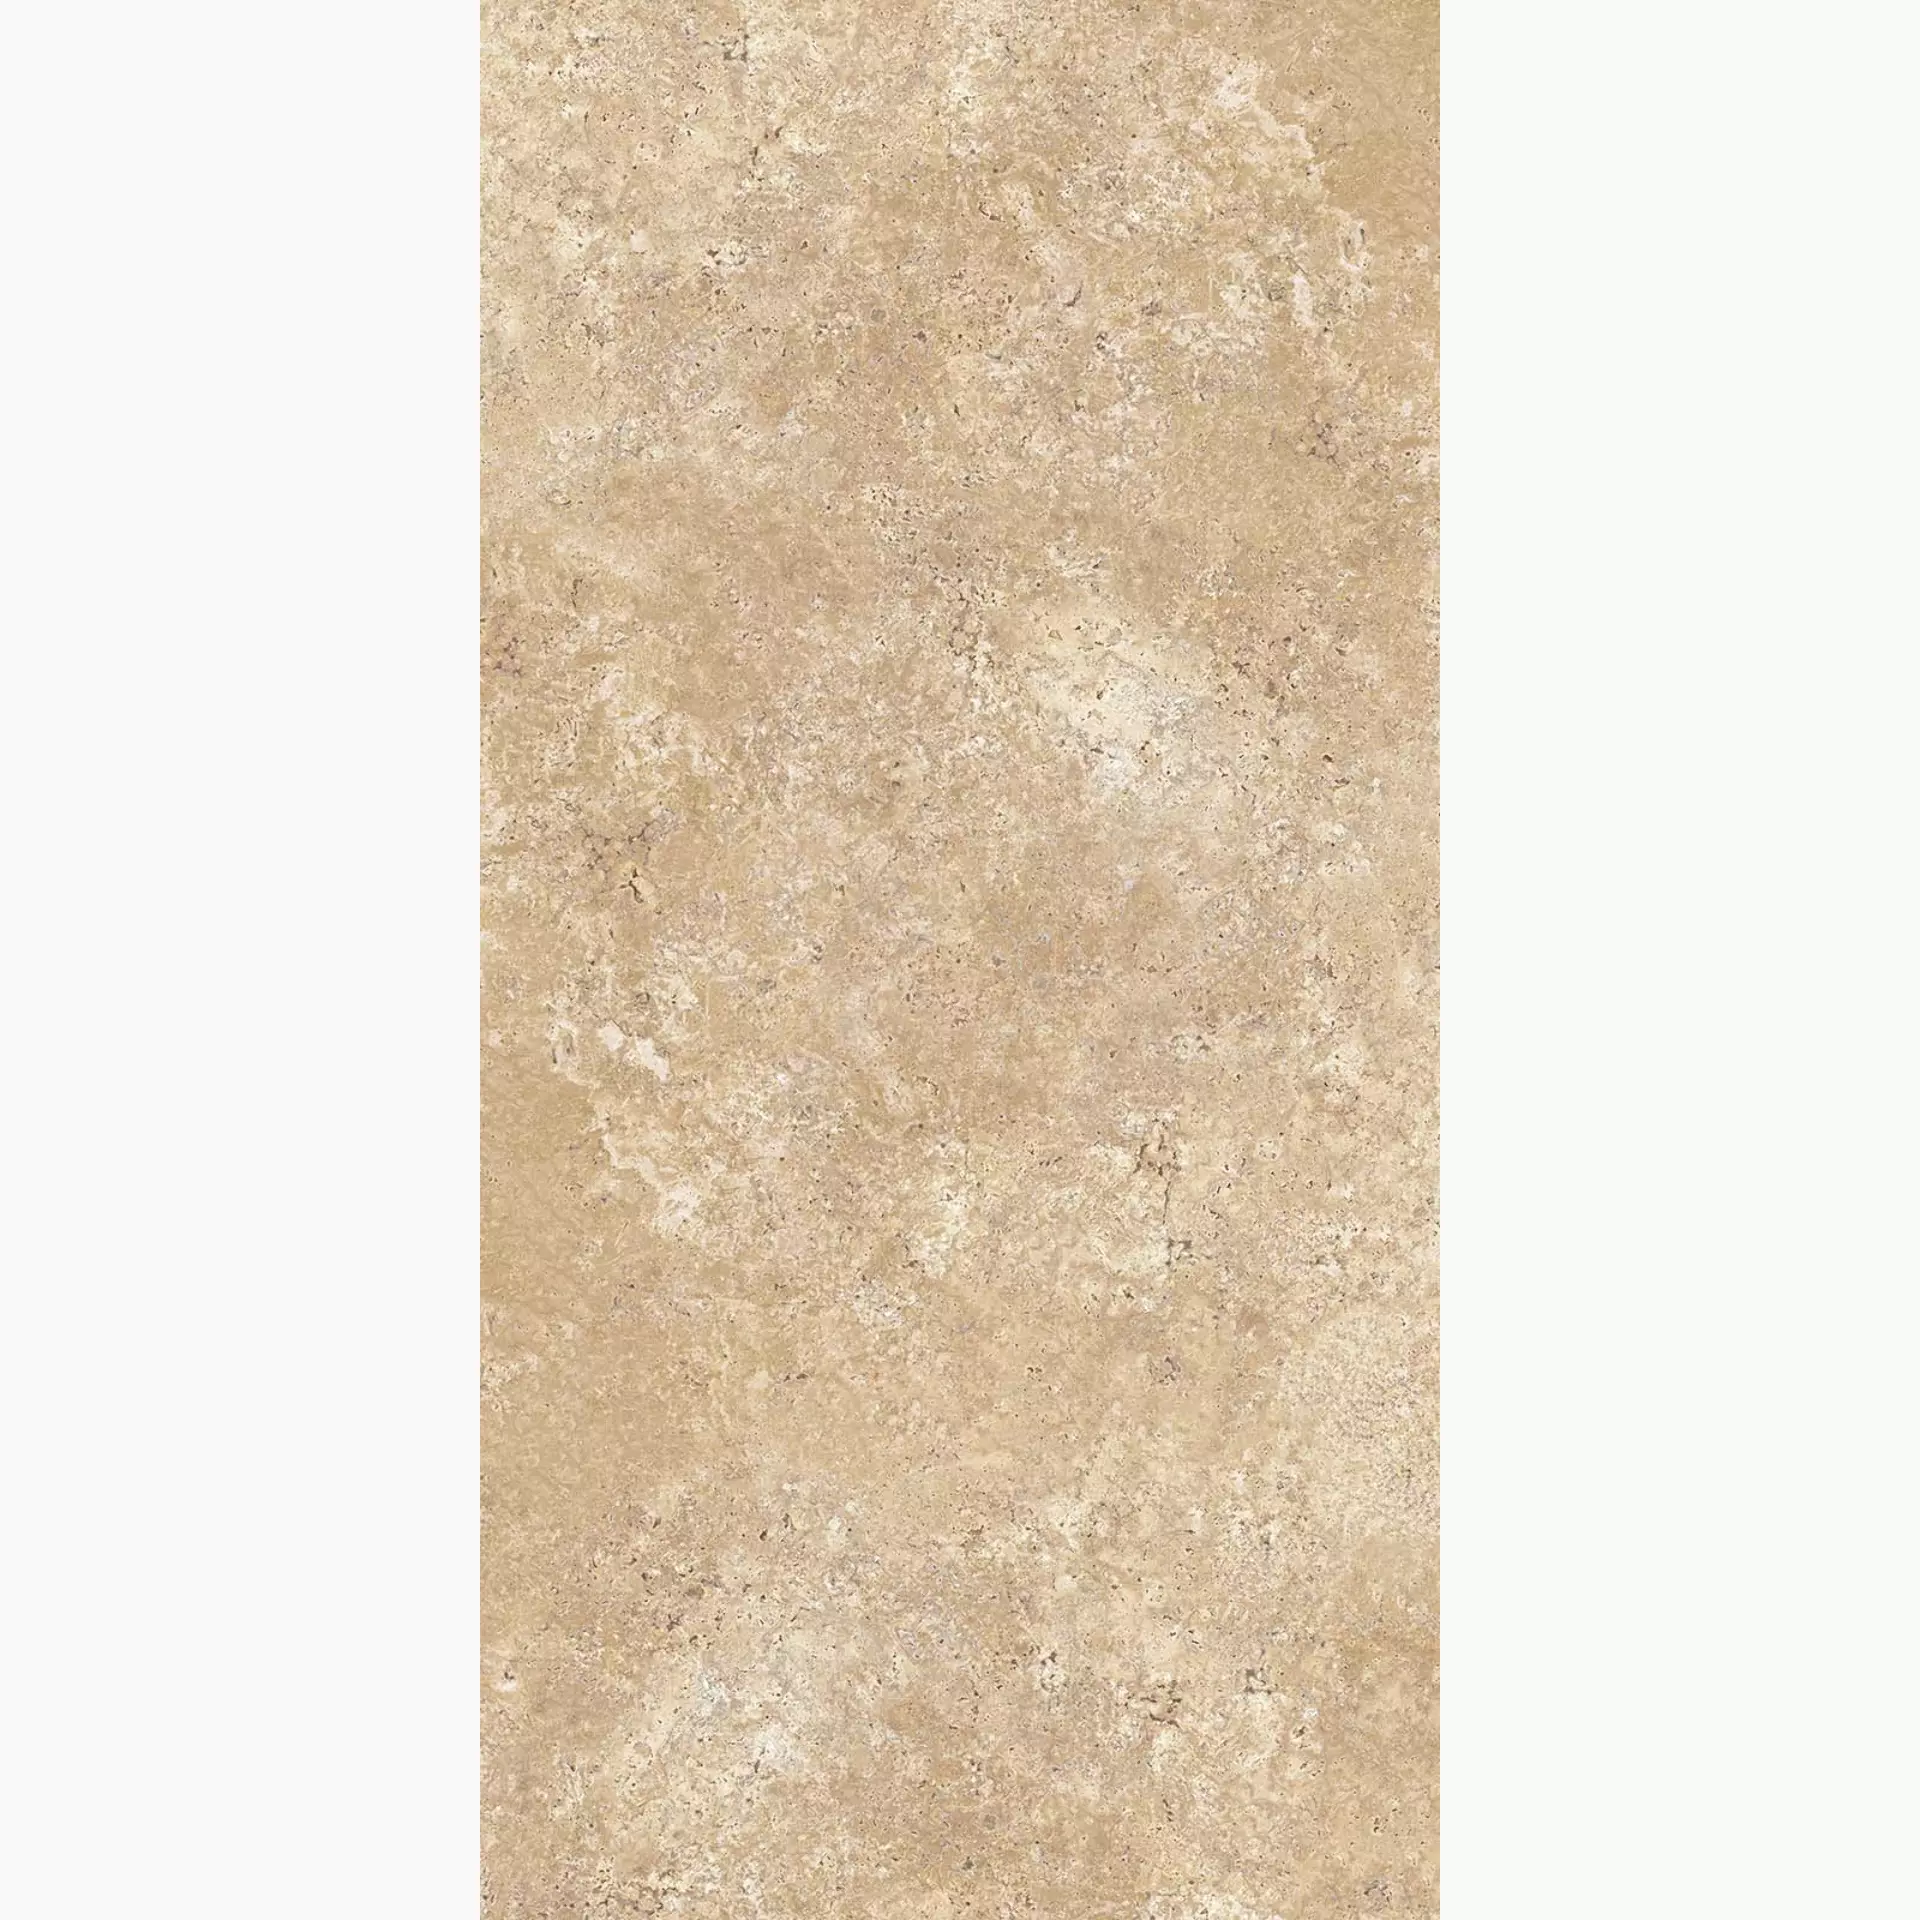 Keope Percorsi Frame Travertino Beige Spazzolato 474A5735 60x120cm rectified 20mm